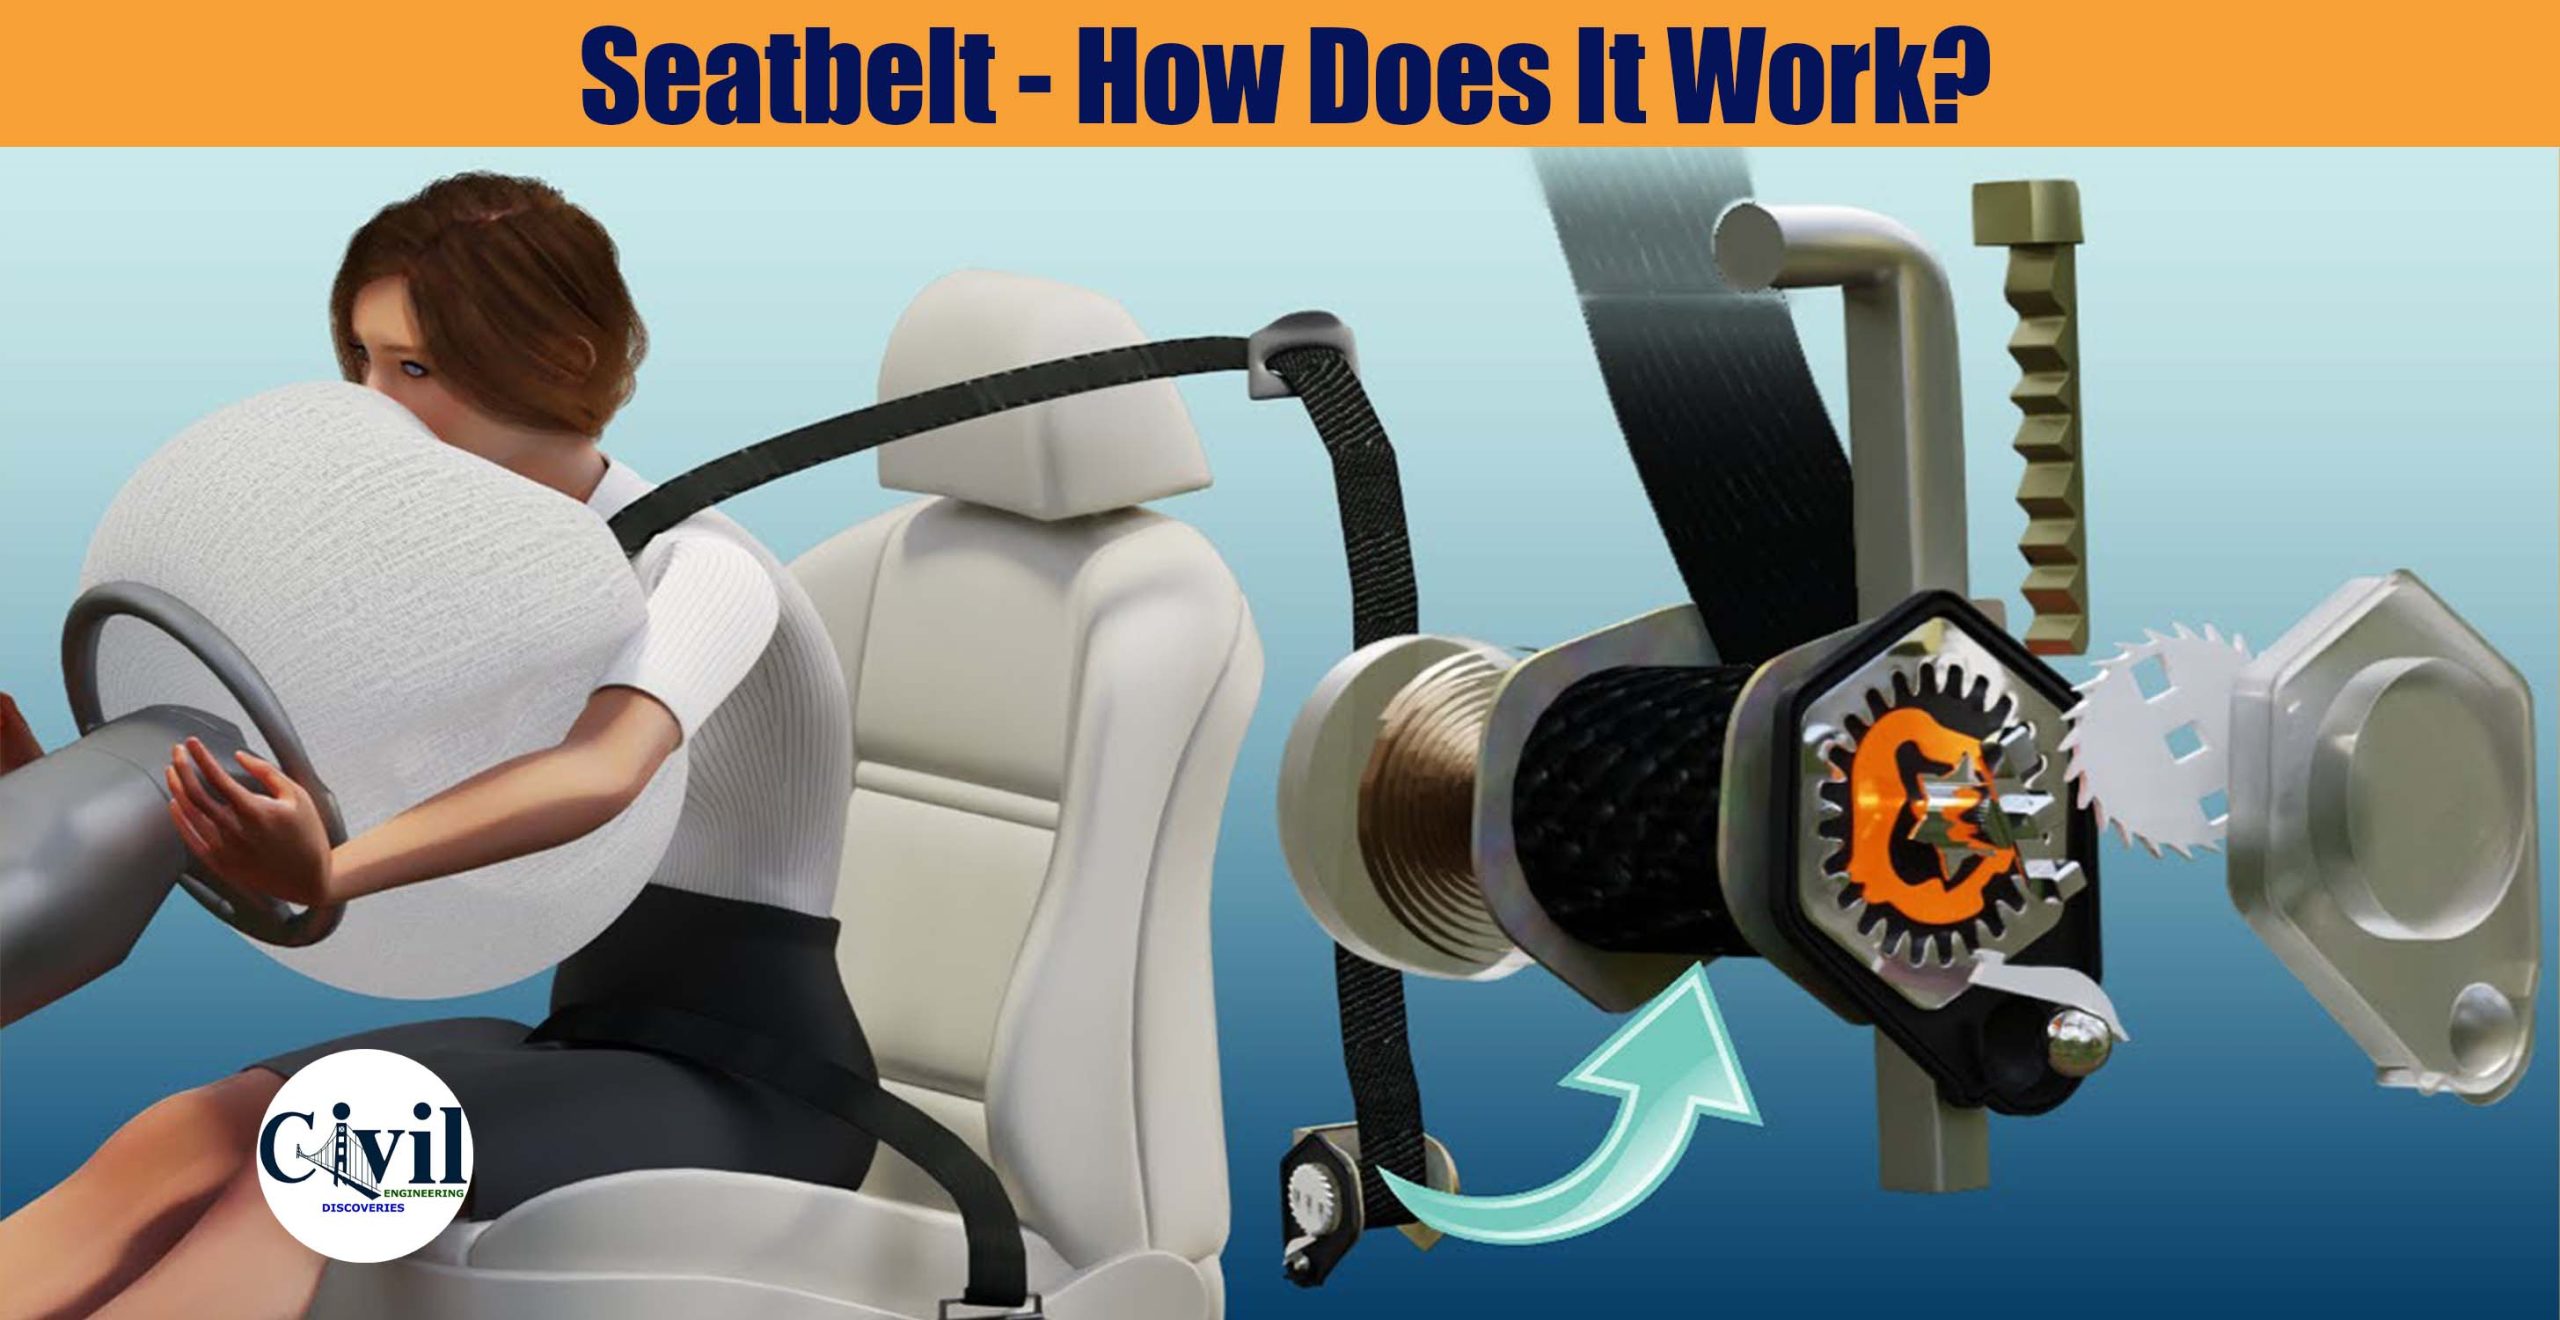 Seatbelt - How Does It Work? - Engineering Discoveries